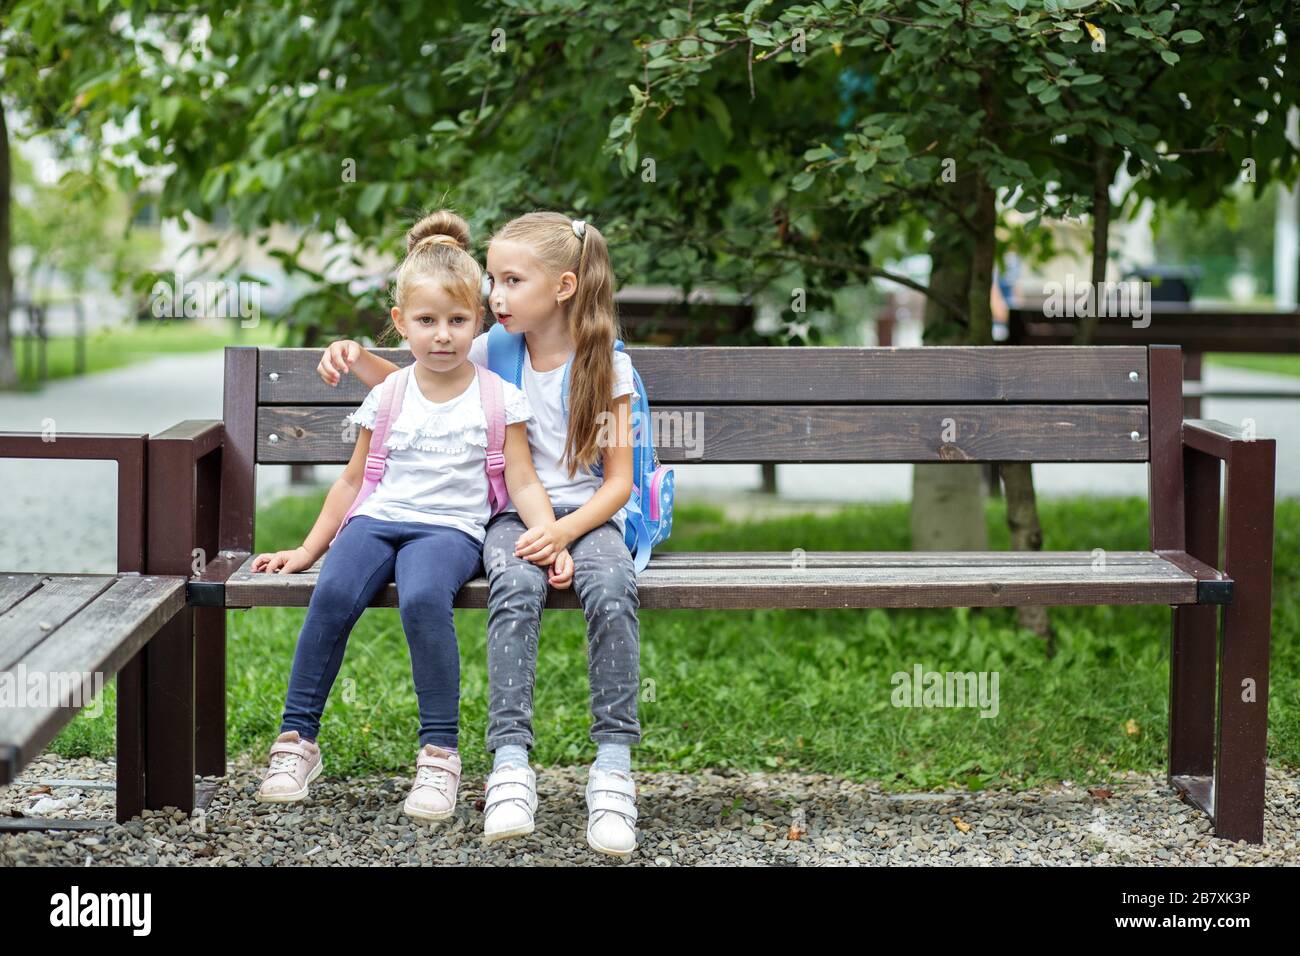 Two small children tell secrets on a bench. The concept is back to school, family, friendship and childhood. Stock Photo